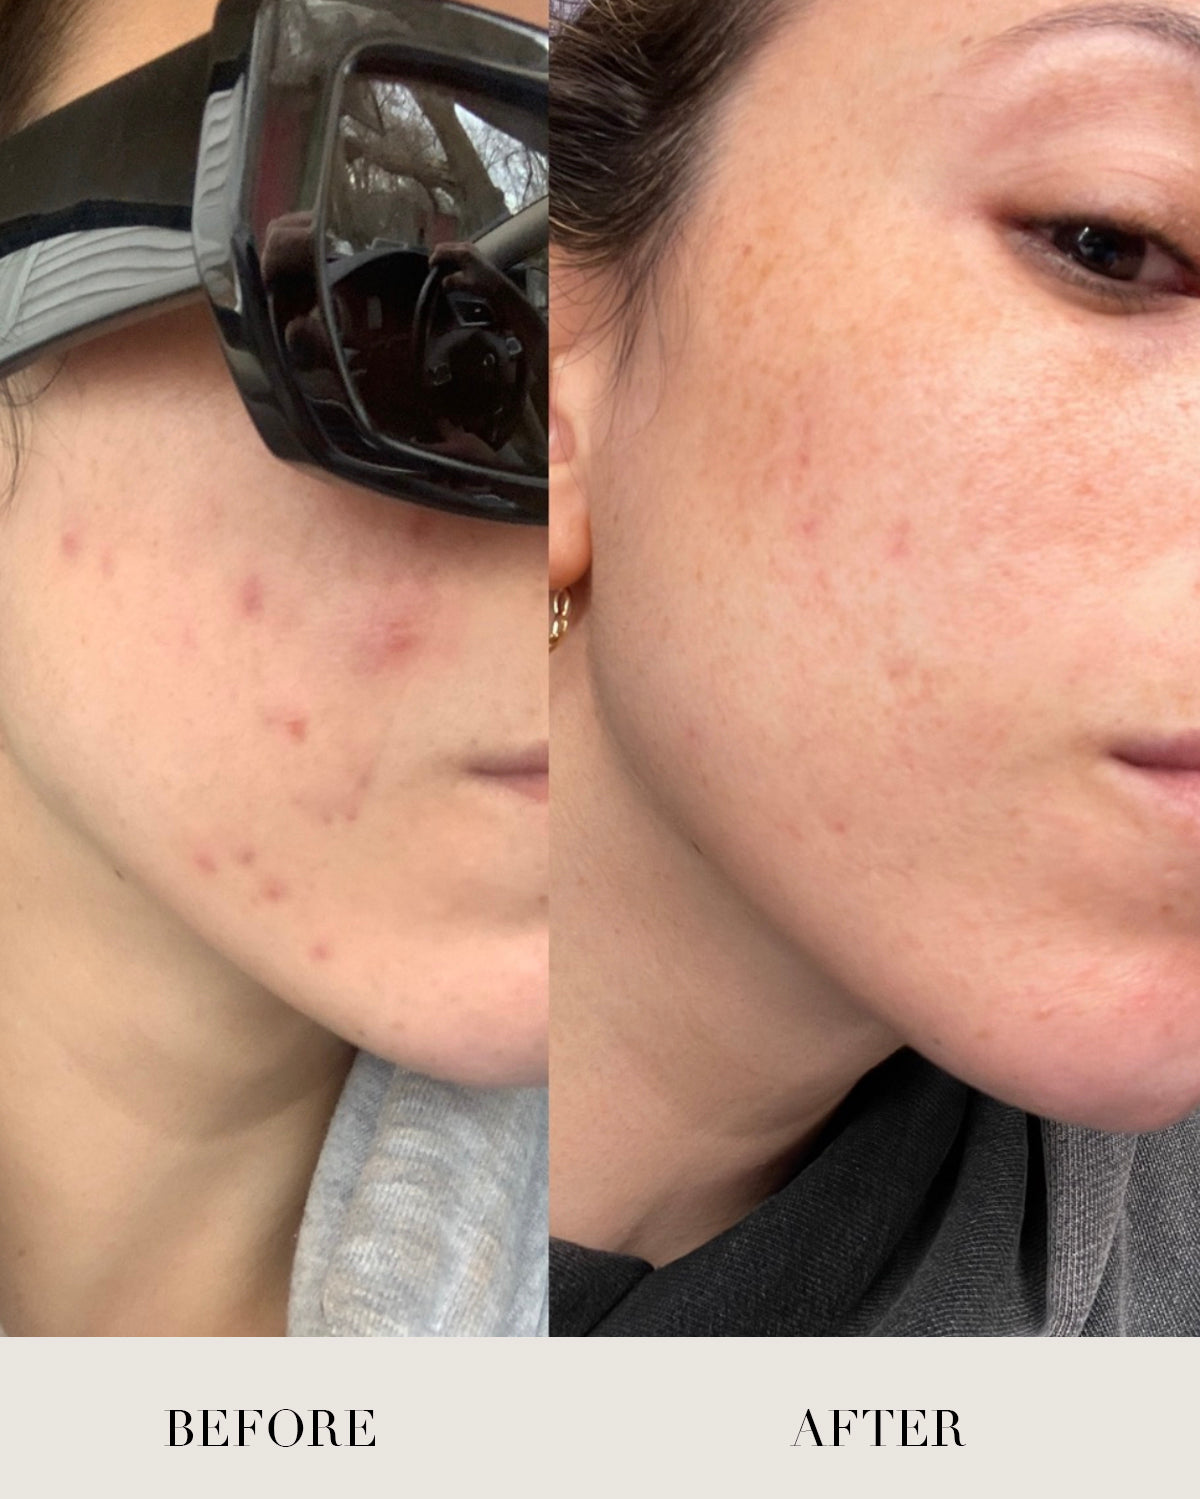 This is a before and after image of a real customer. In the before you can see hyperpigmentation and acne. In the after, her skin tone is even and acne free